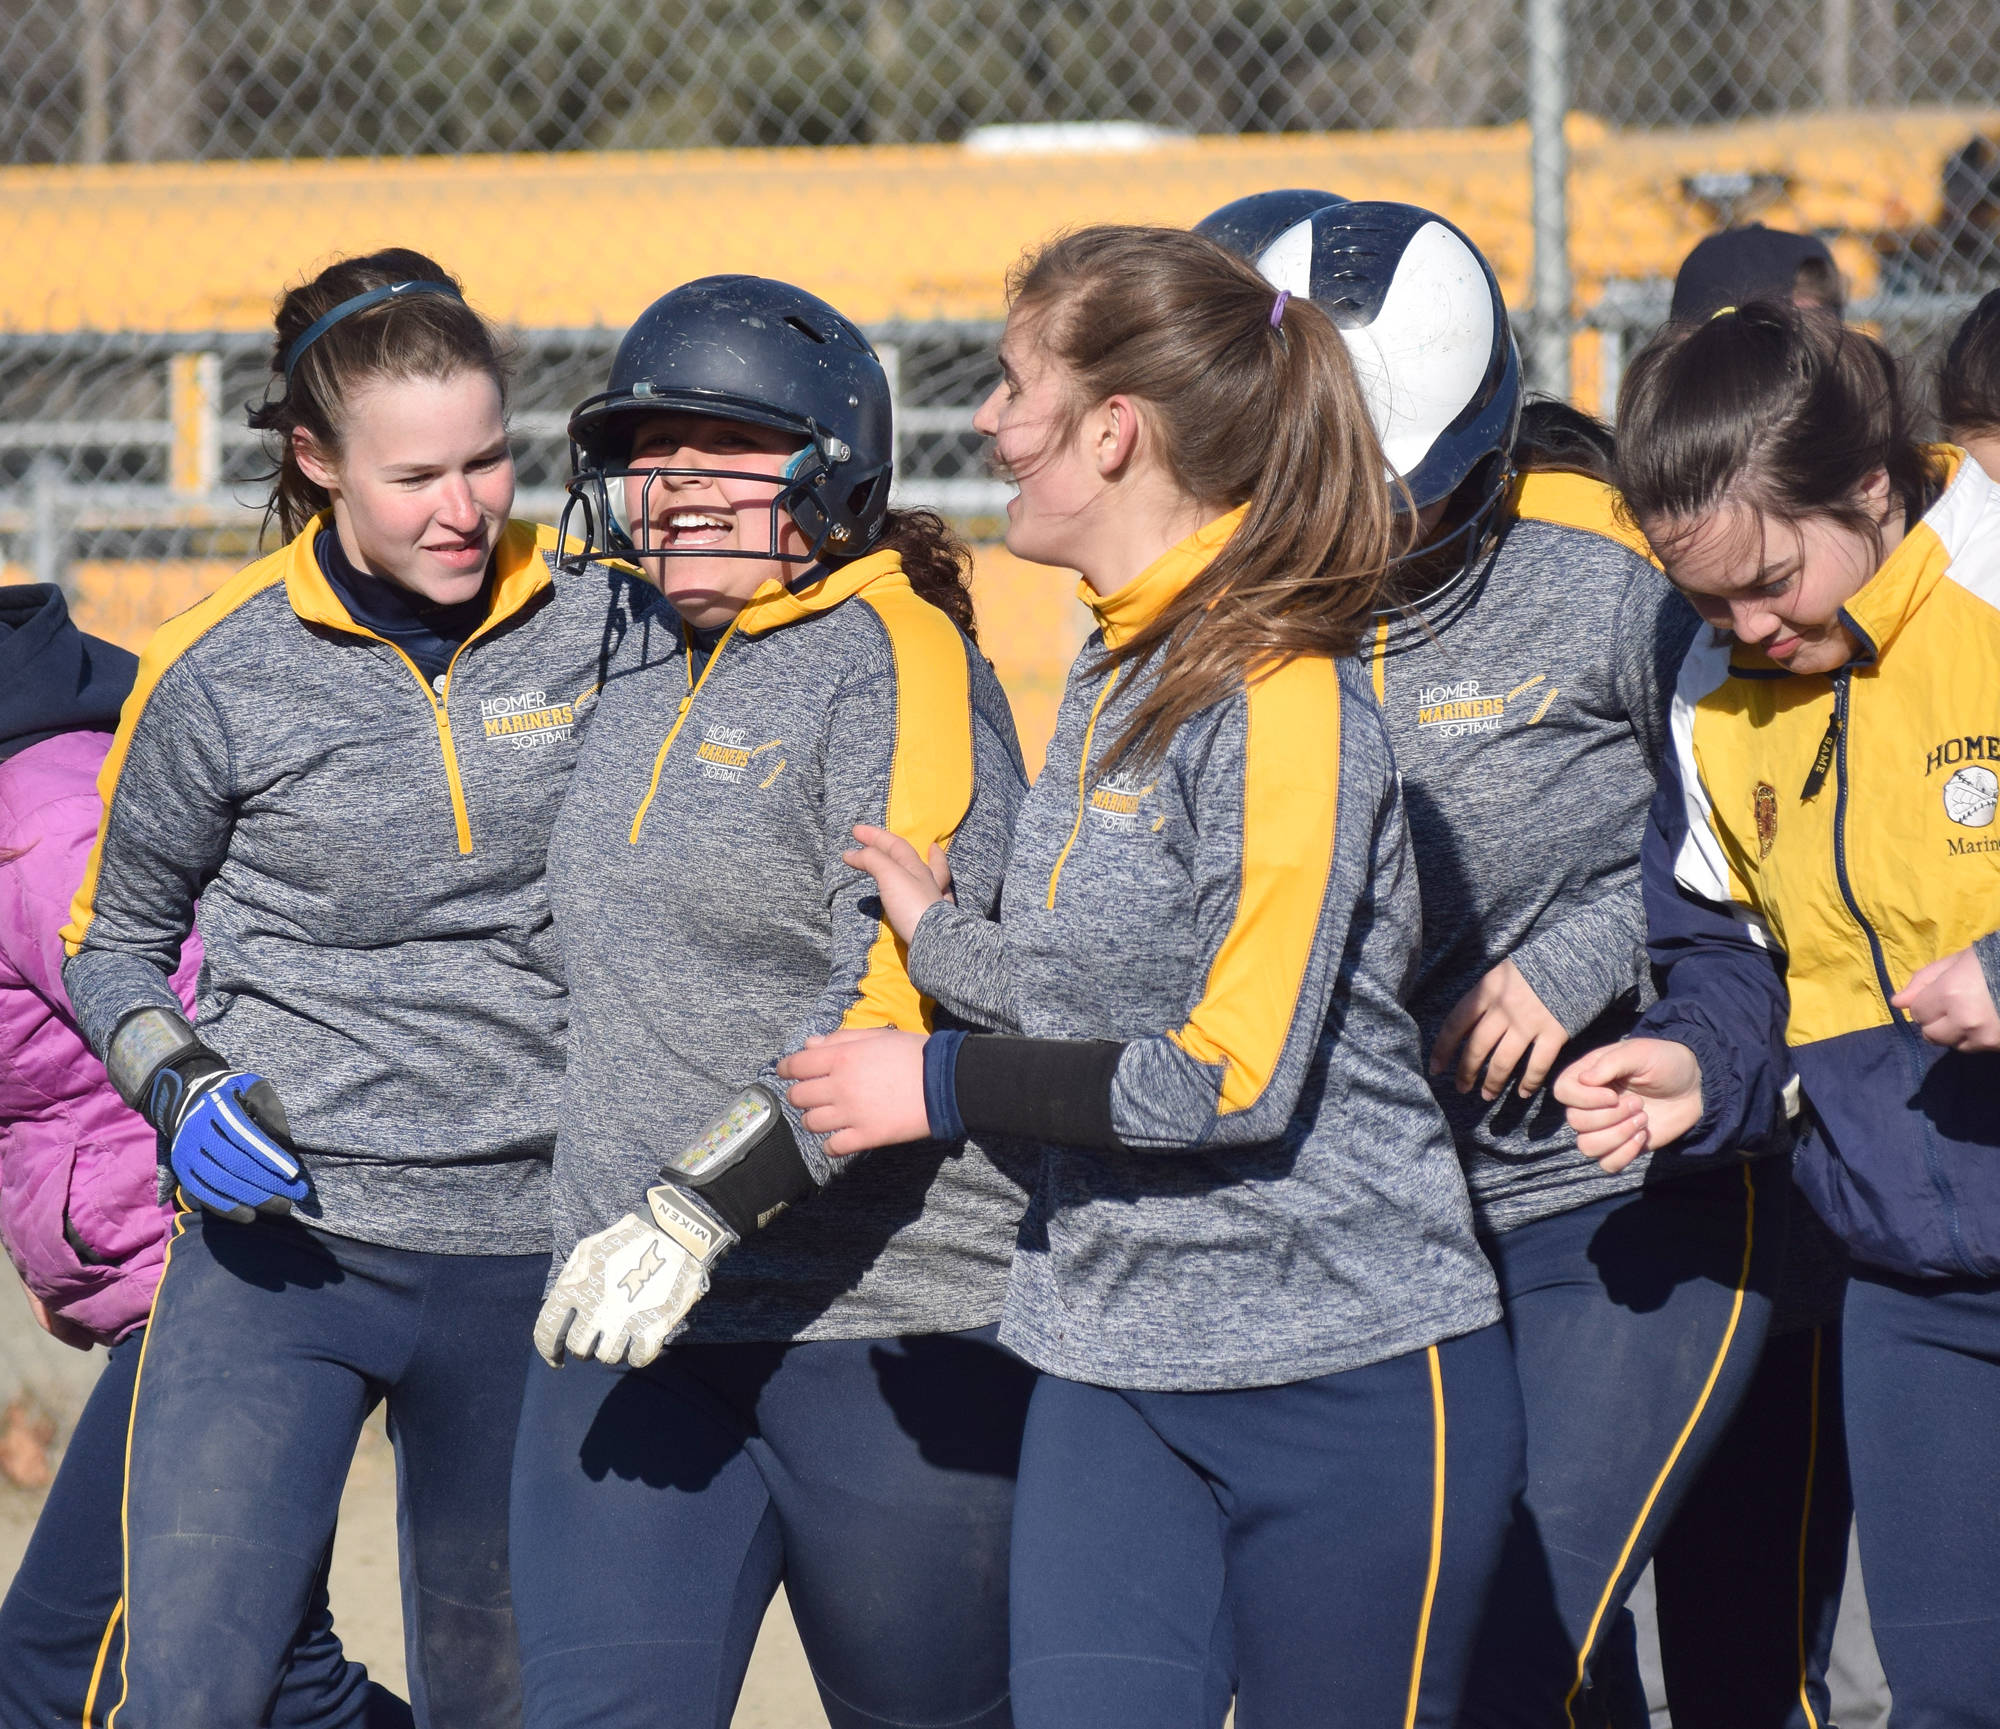 Homer junior Brianna Hetrick (second from left) celebrates with her teammates after touching home plate following a home run Tuesday evening at the Soldotna Little League fields. (Photo by Joey Klecka/Peninsula Clarion)